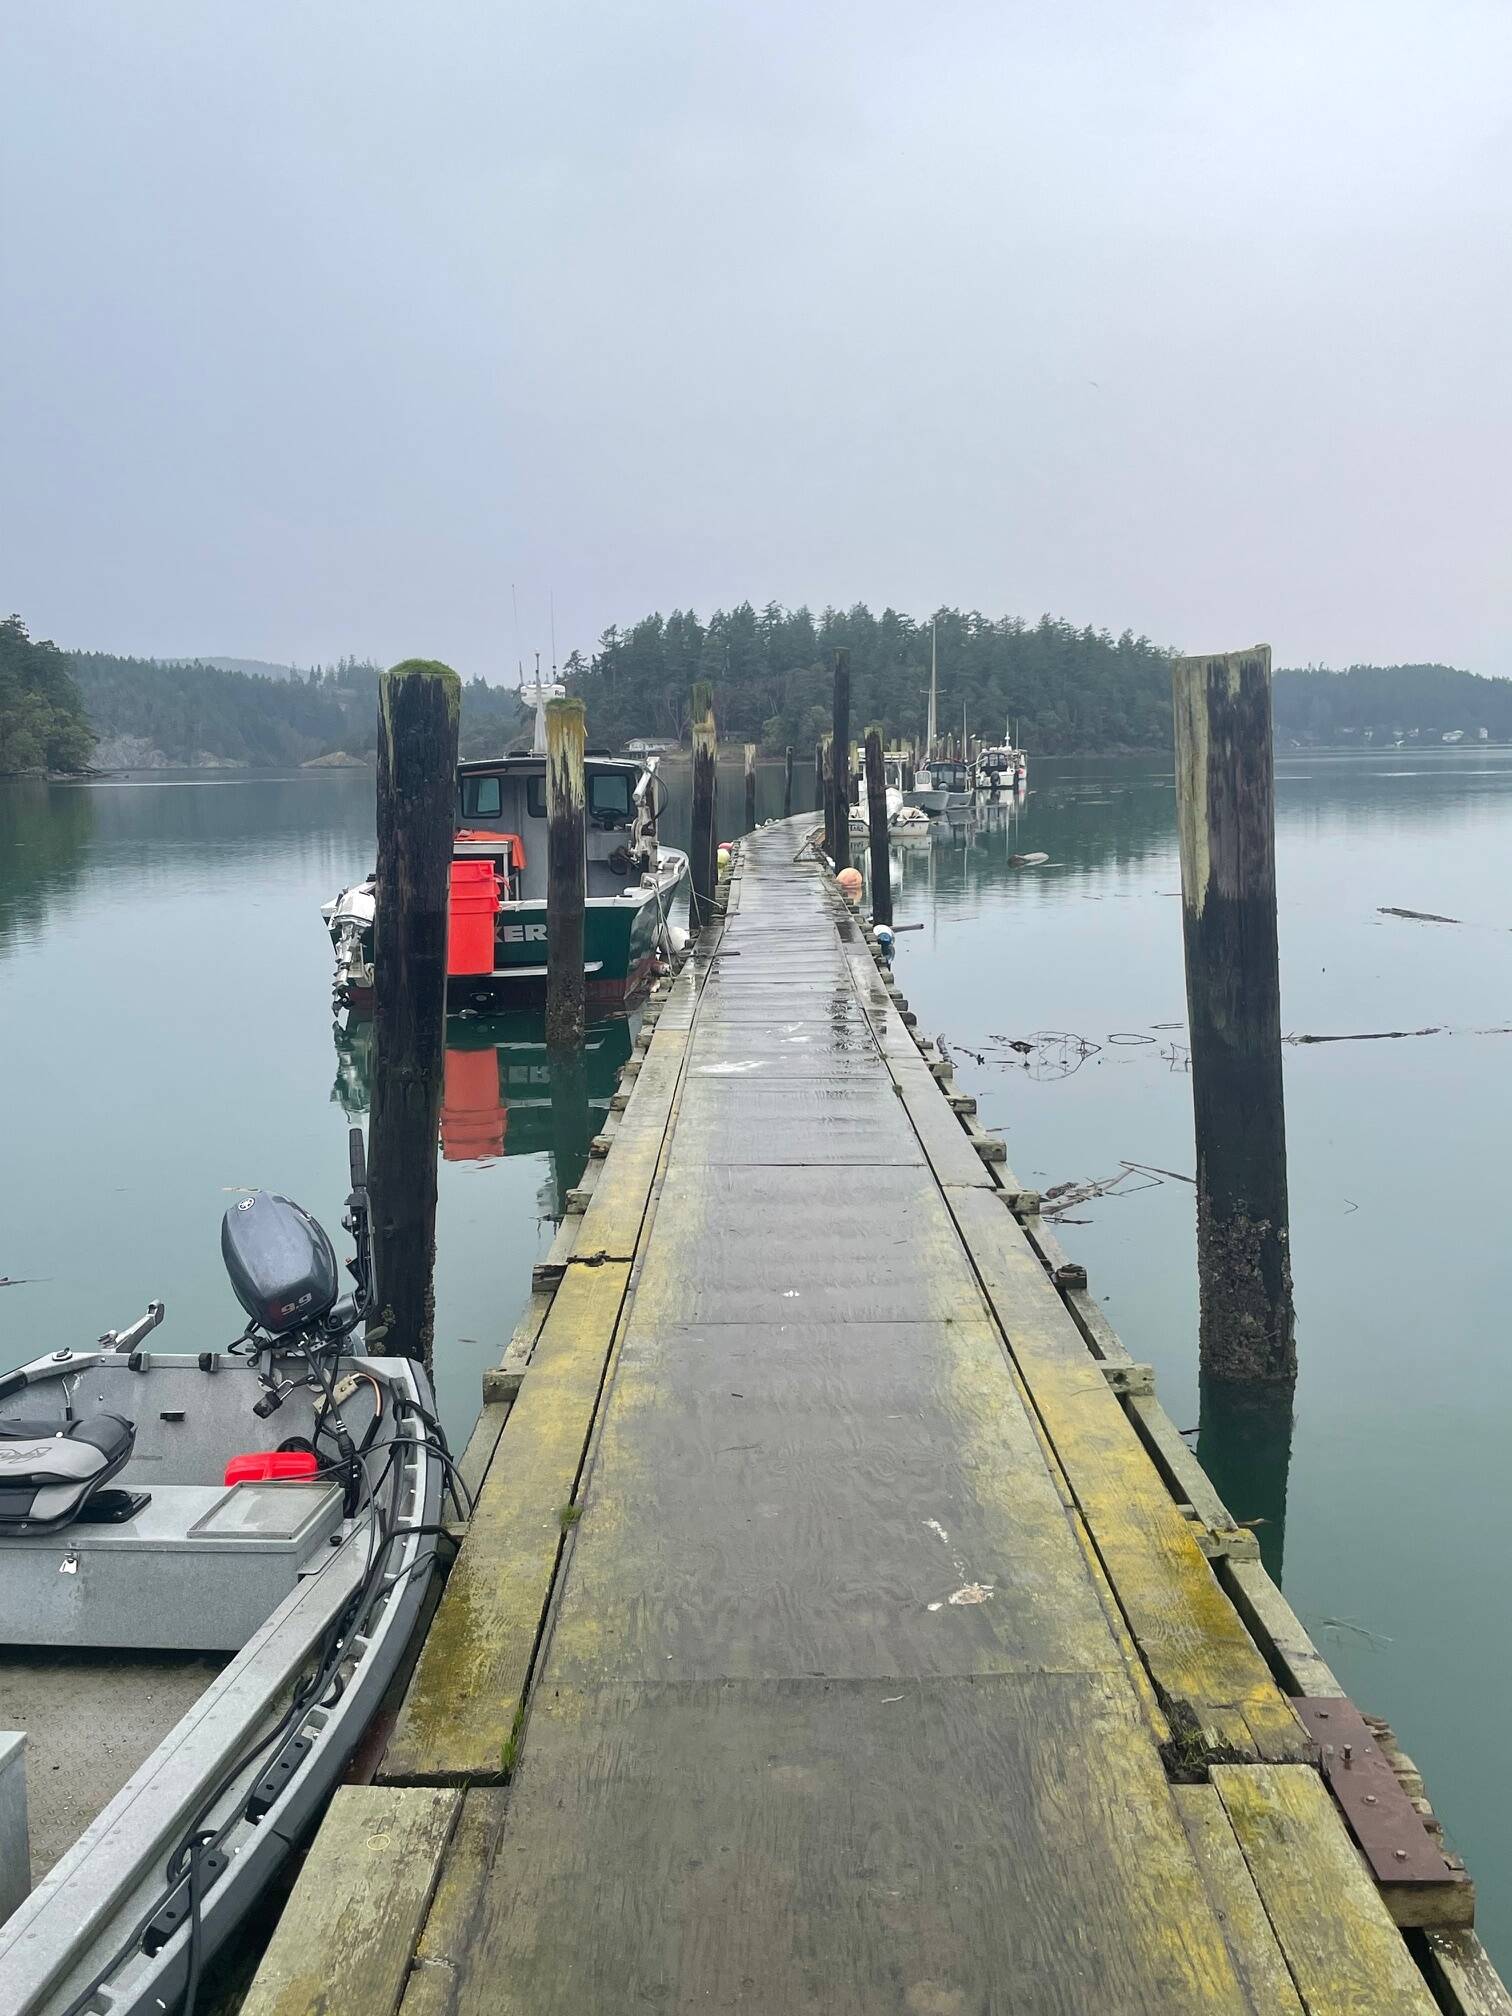 Island County is moving ahead with plans to rebuild the dock at Cornet Bay. (Photo by Jessie Stensland)